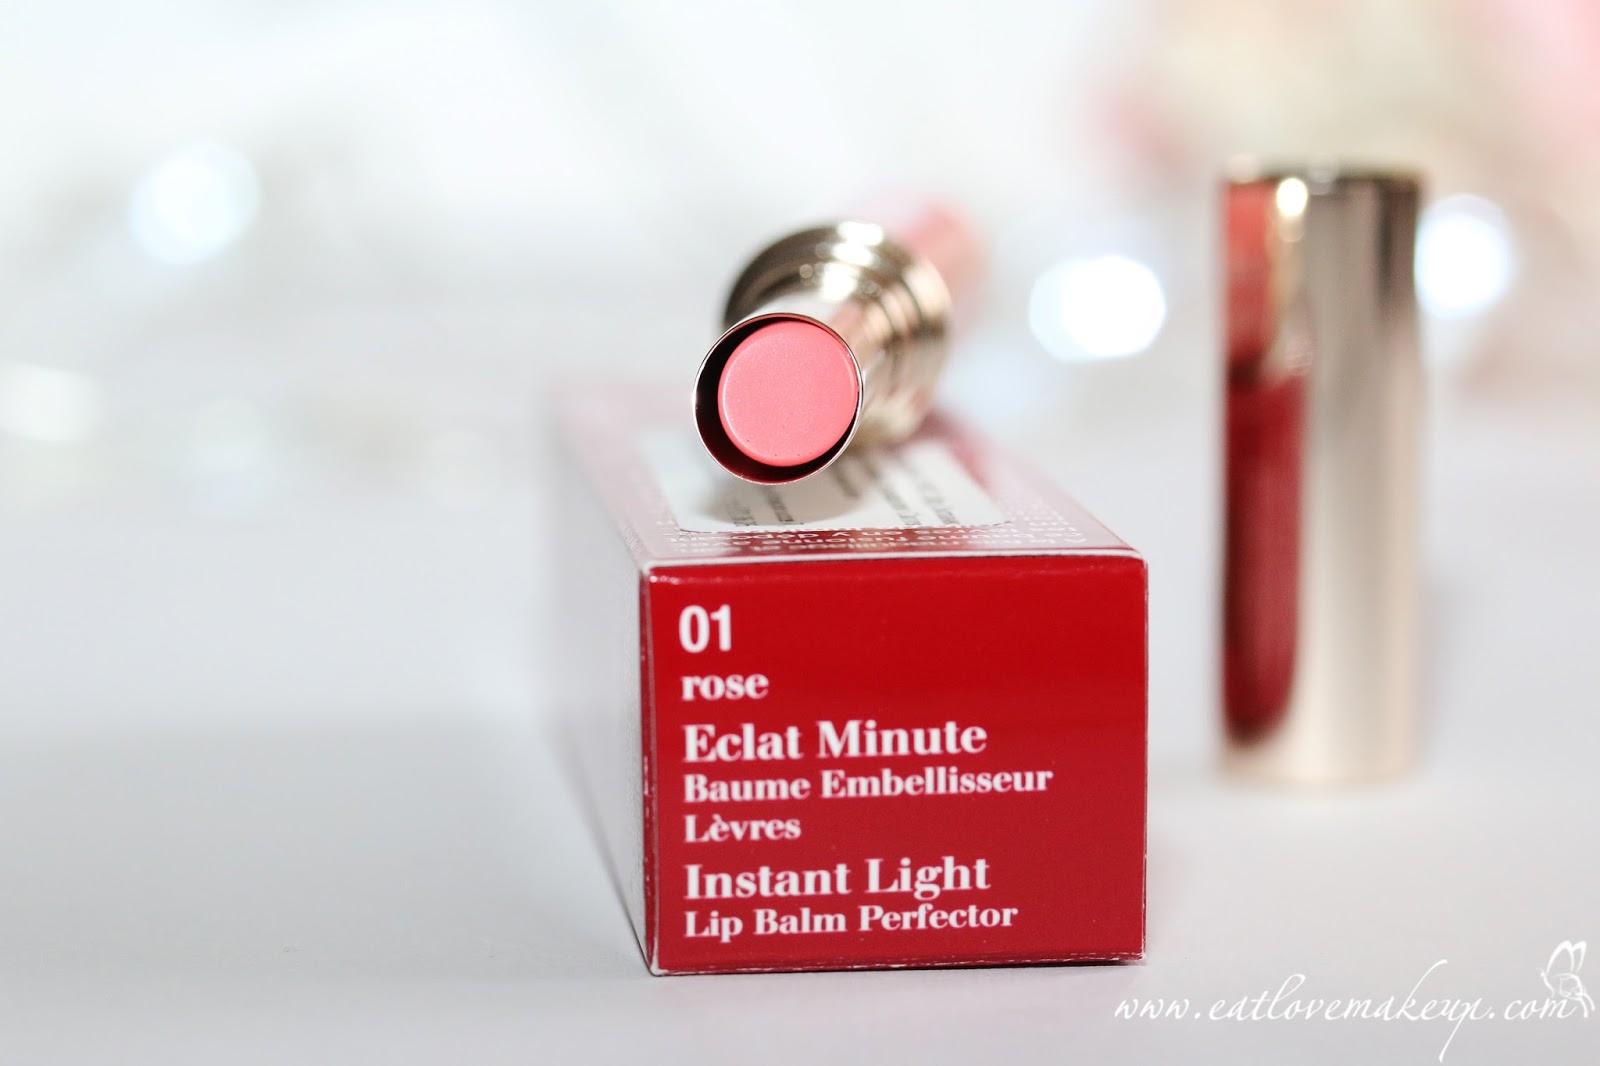 Clarins Instant Light Natural Lip Balm Perfector 01 Rose